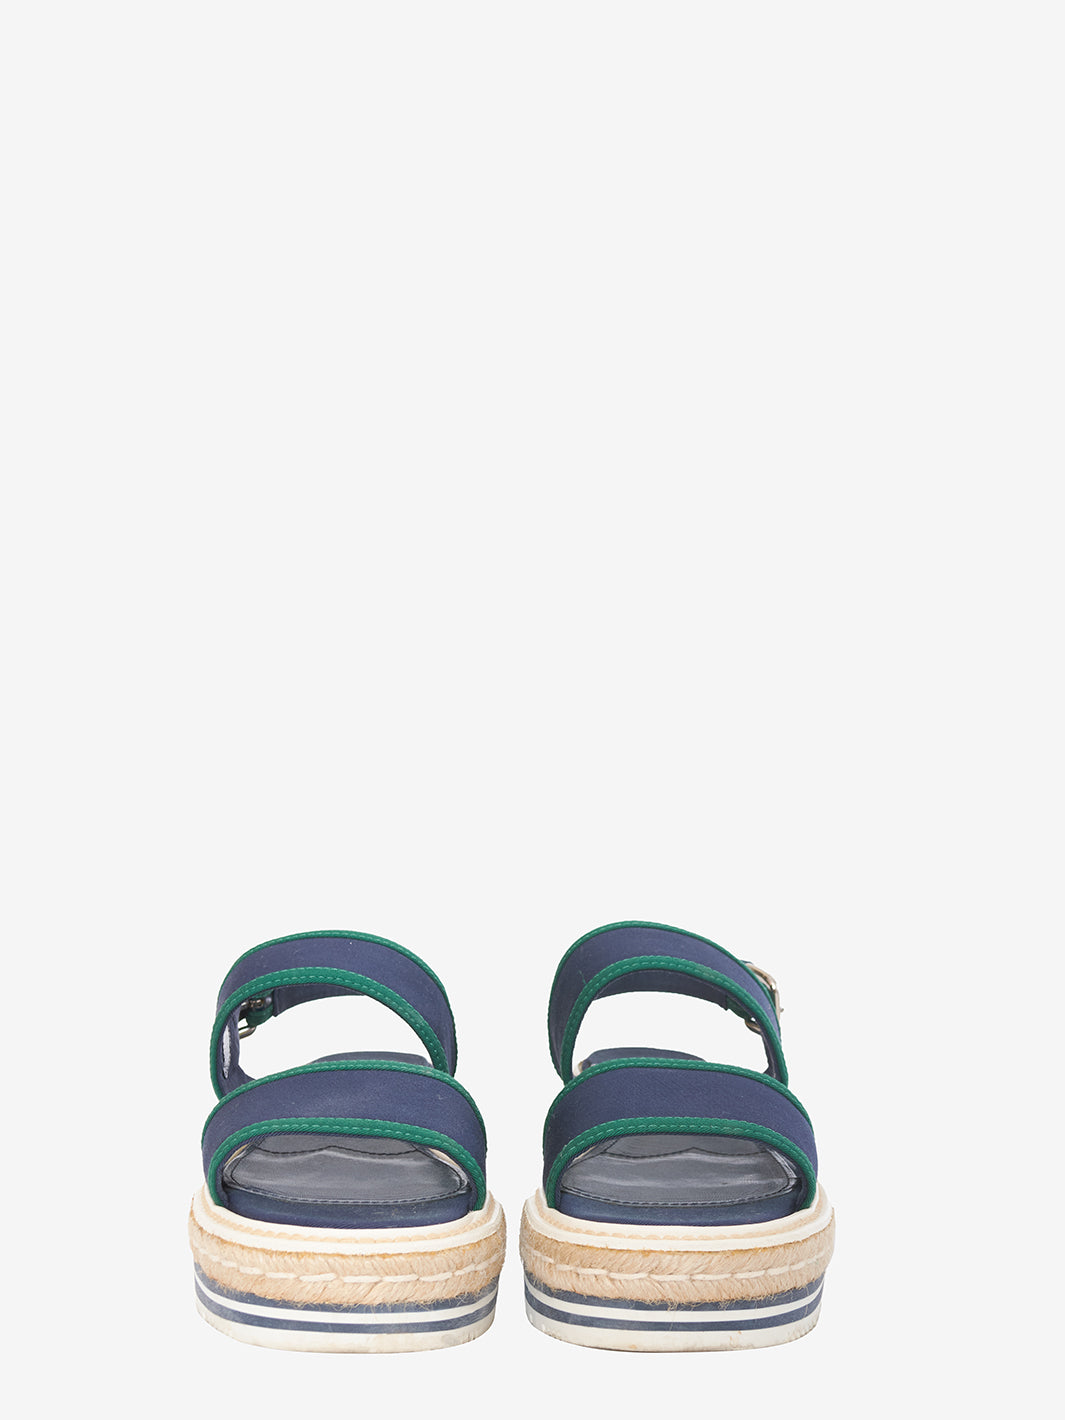 Prada Canvas sandal with rope and rubber wedge